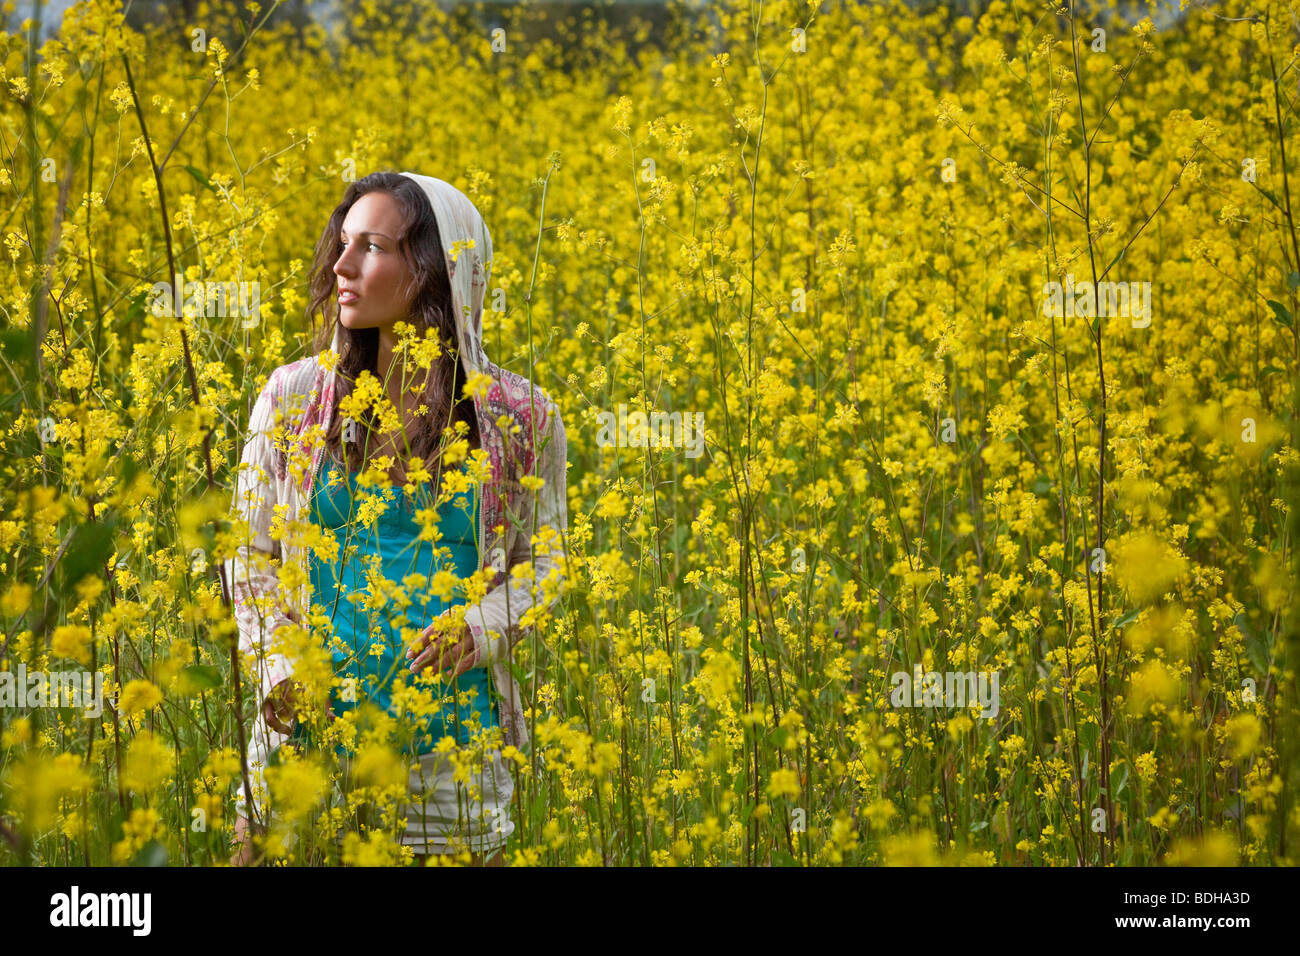 Young woman standing in a field of yellow flowers wearing a hood and looking into the distance Stock Photo